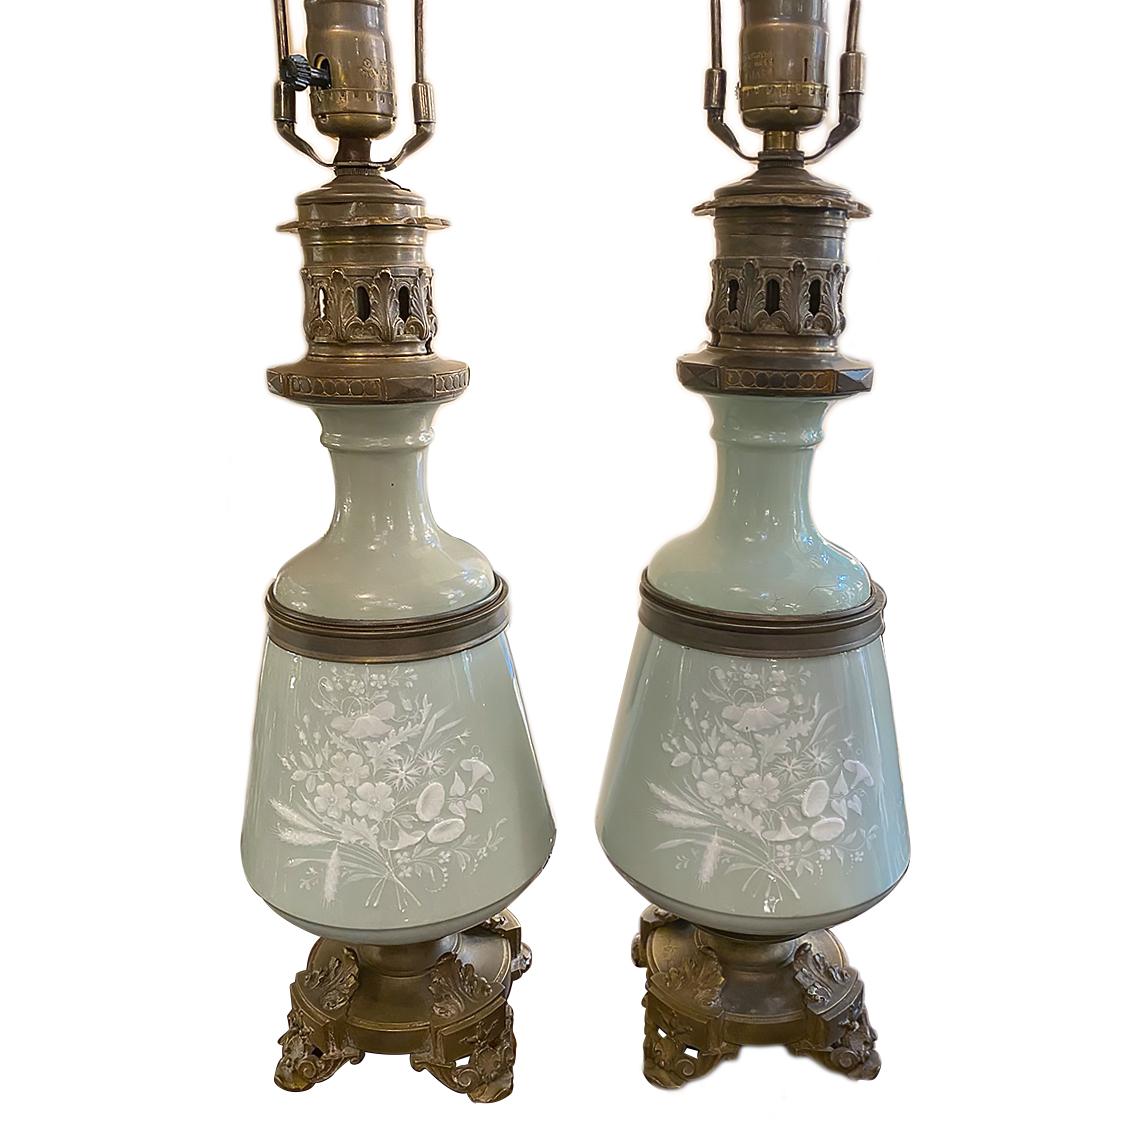 A pair of turn-of-the-century French celadon table lamps with floral decoration, bronze bases and fittings.

Measurements:
Height of body: 17.5